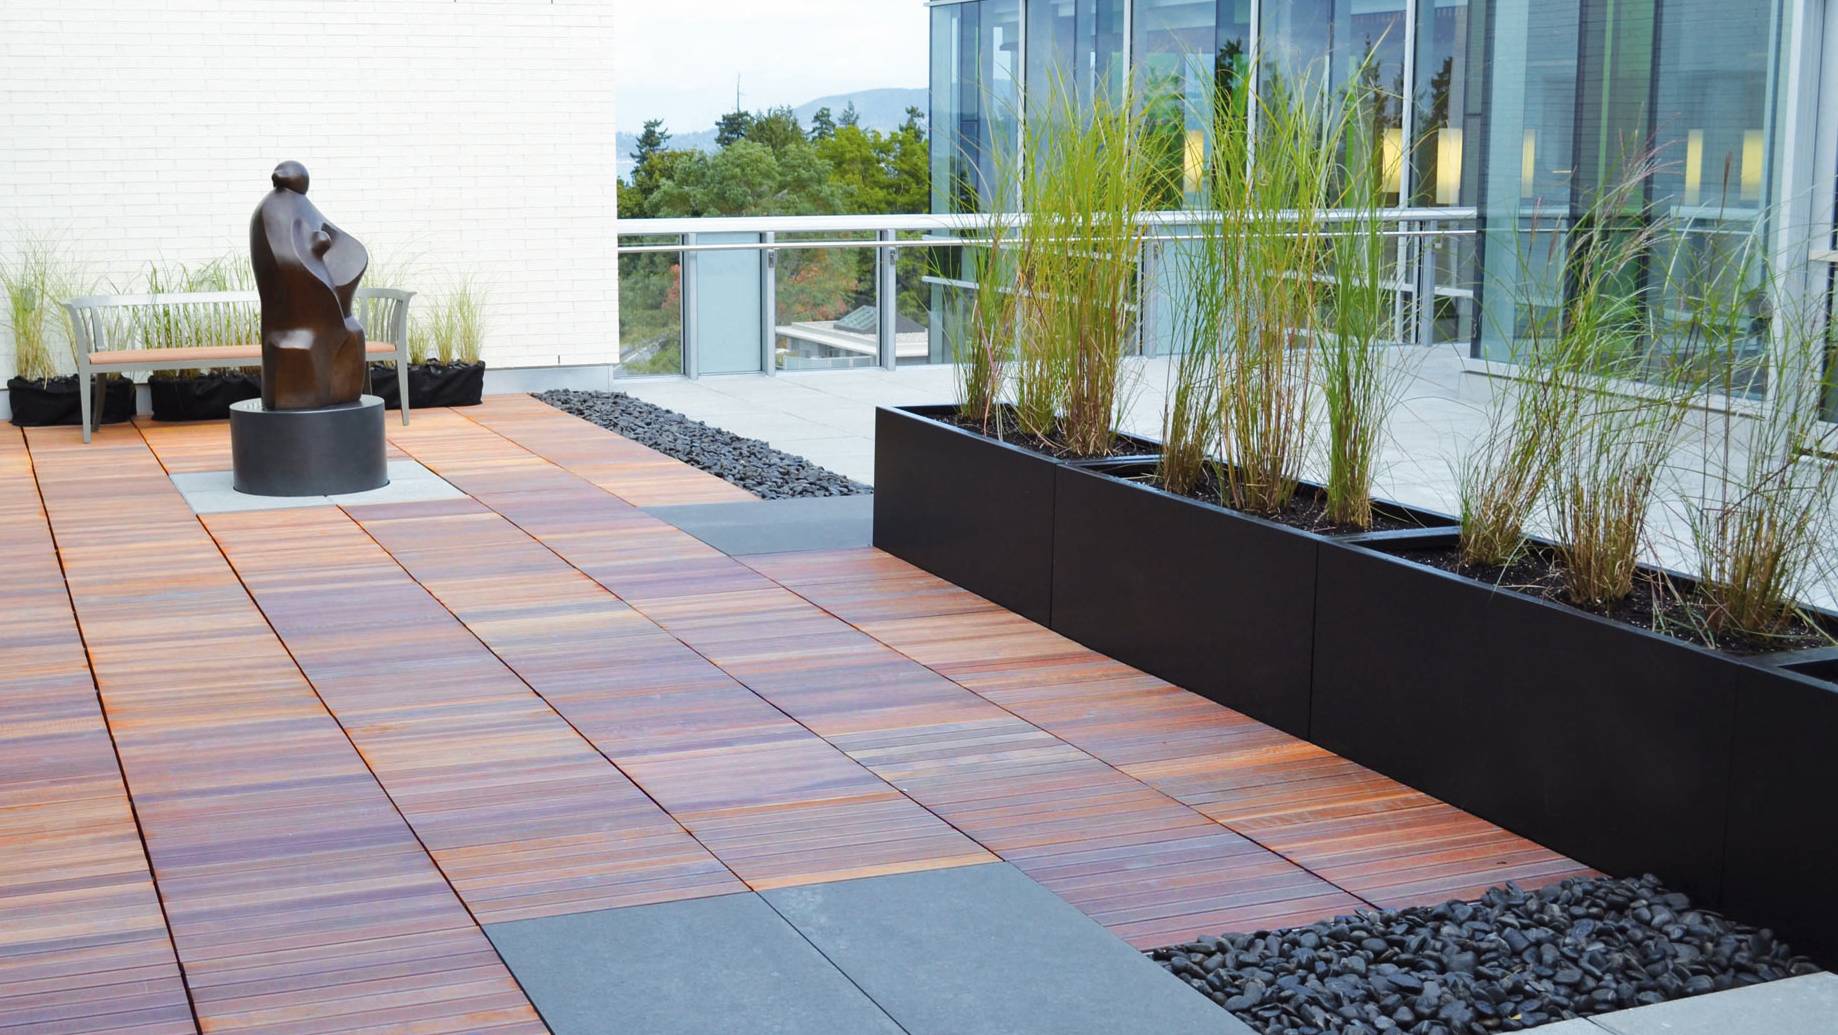 amenity space planters and wood tiles